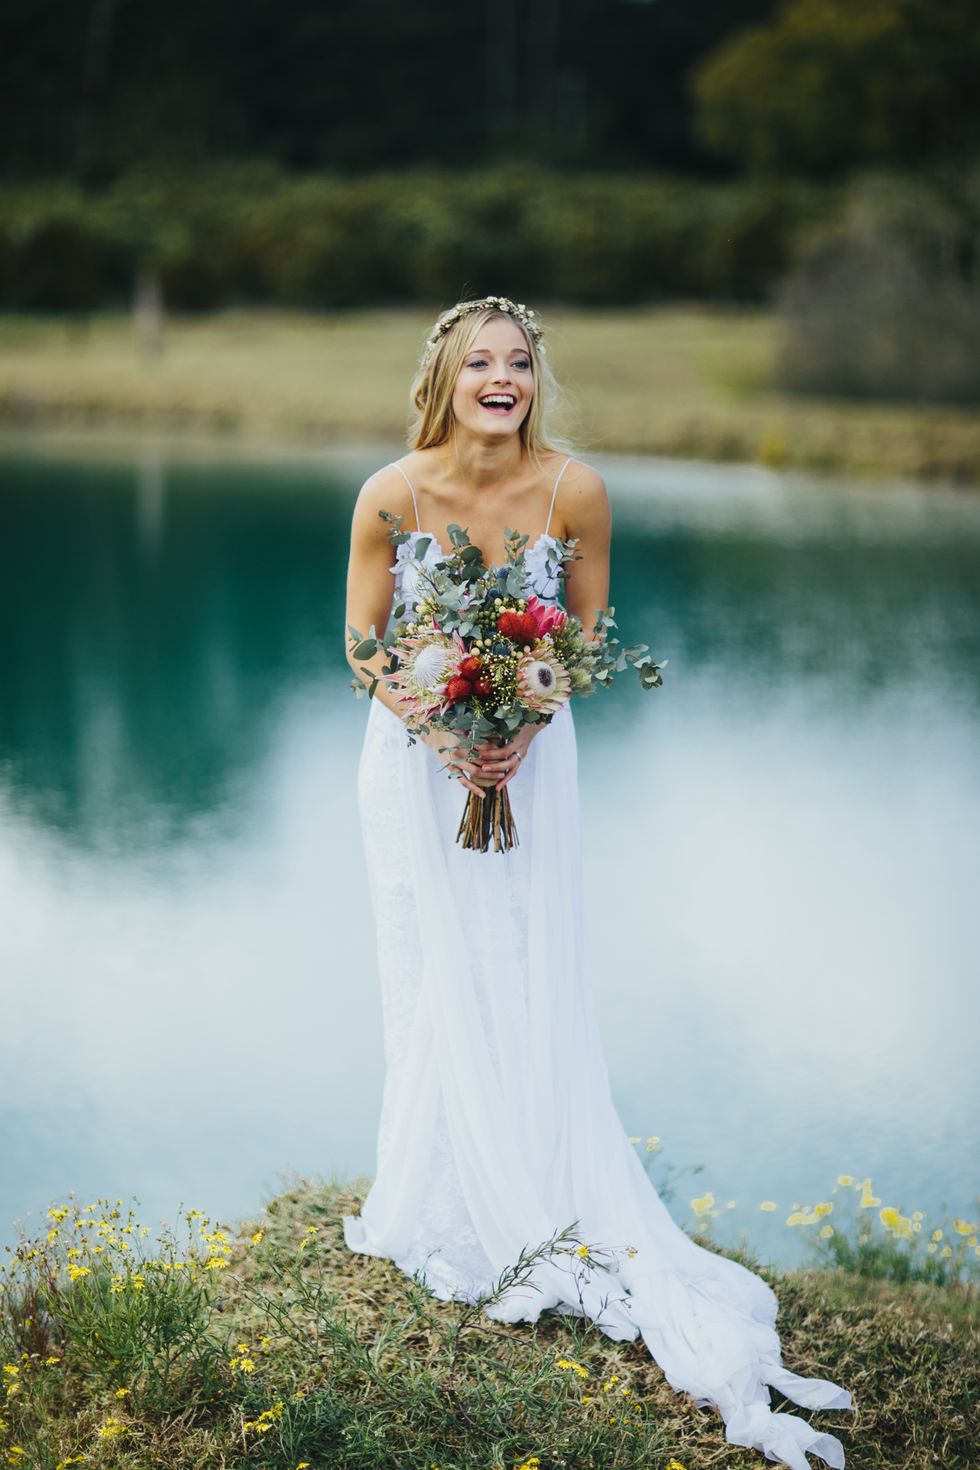 Clothing, Dress, Shoulder, Bridal clothing, Photograph, Happy, People in nature, Wedding dress, Bride, Gown, 